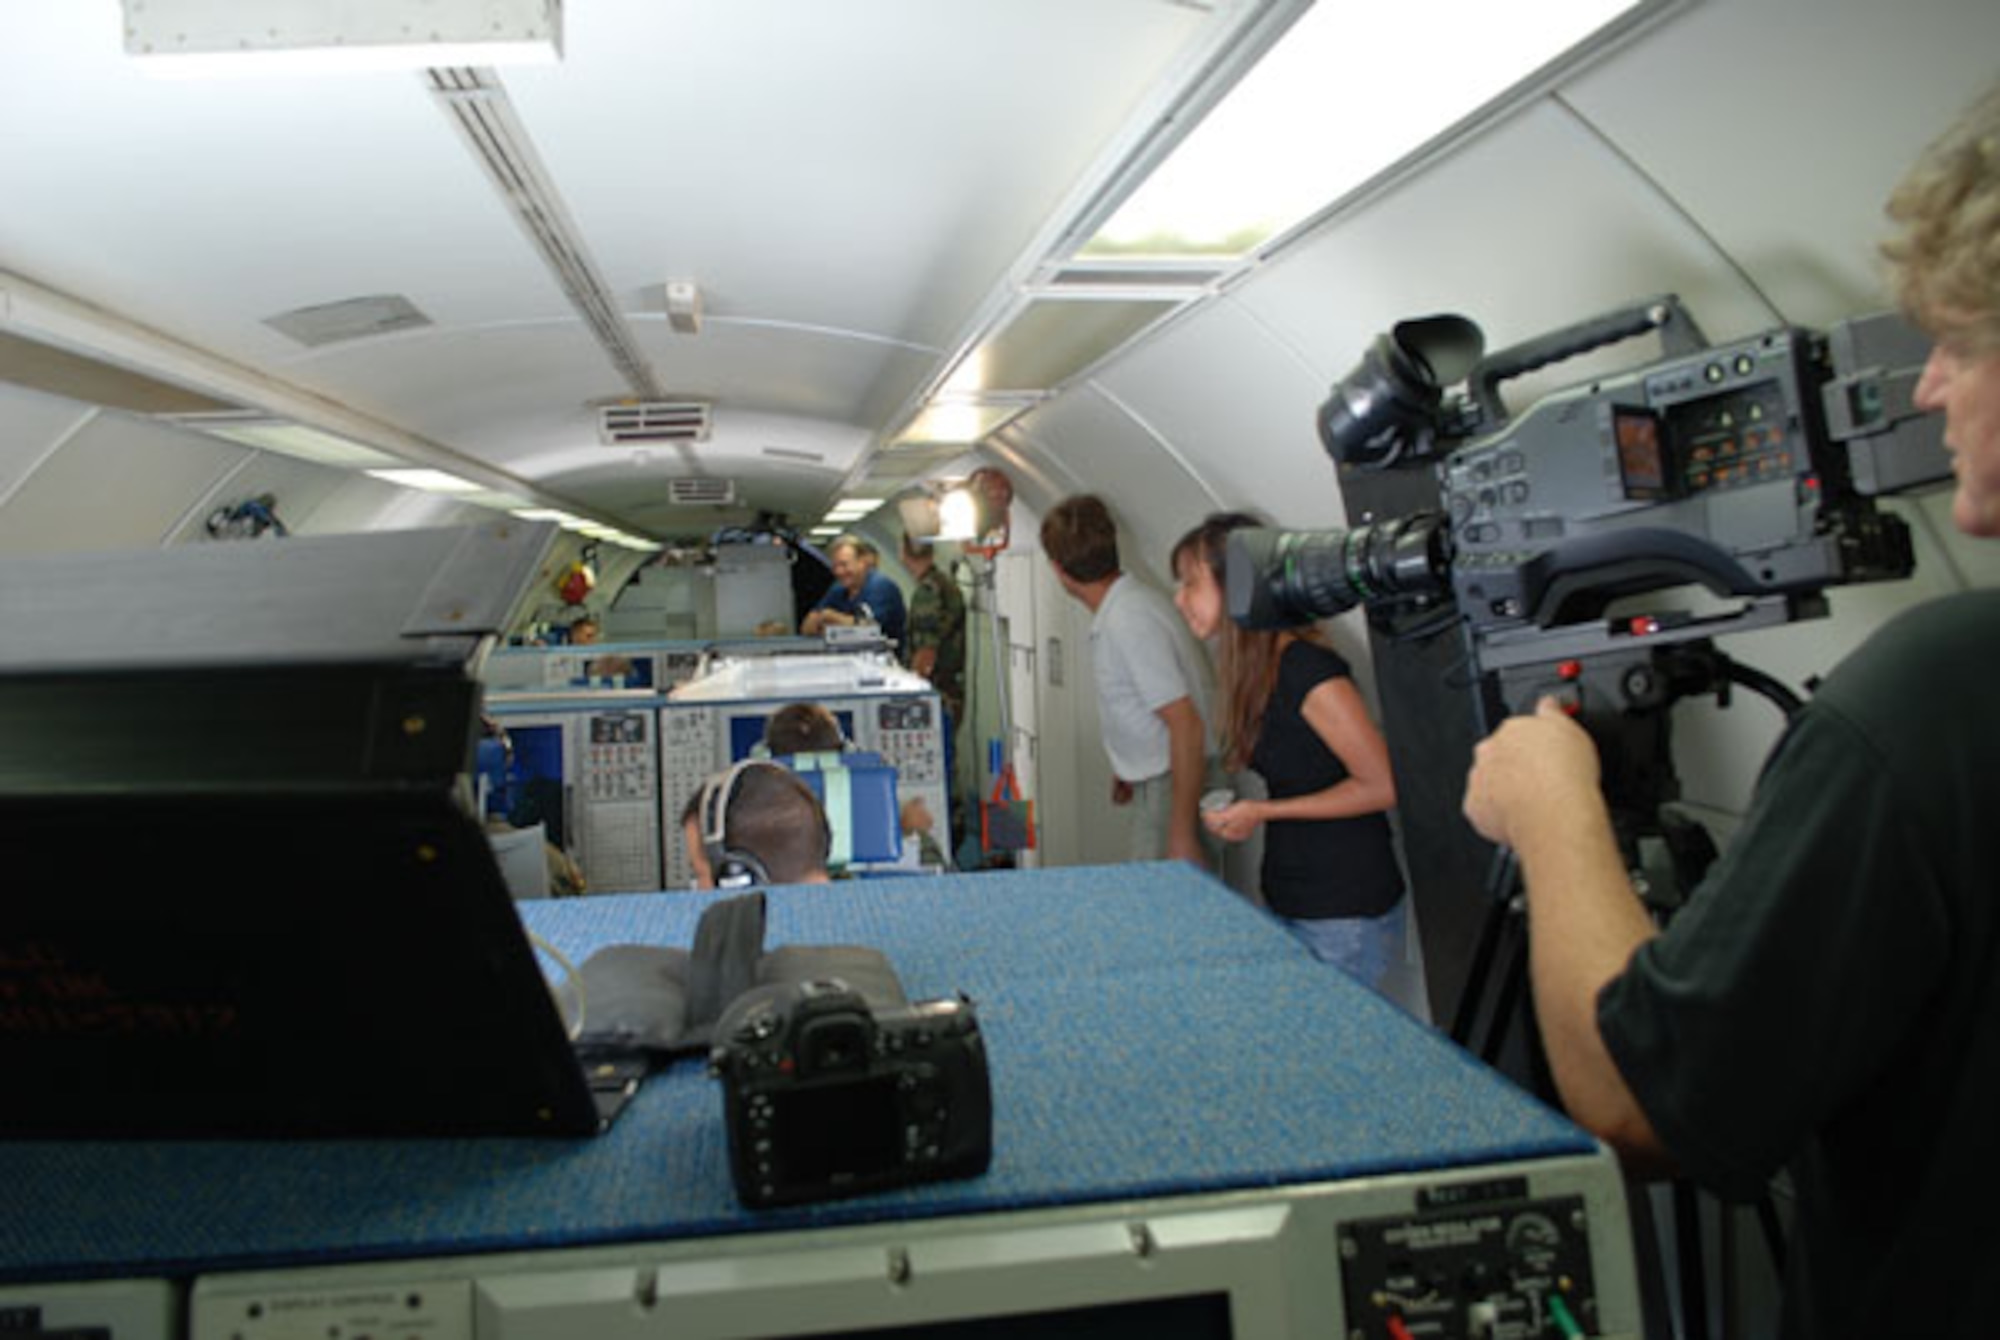 While 513th Air Control Group aircrew members work at their E-3 consols during a training tape simulation, film crews work to video tape the action. These Air Force Reservists and additional members of the 513th ACG Maintenance Squadron participated in the production of an Air Force Reserve television commercial for the Airborne Warning and Control Systems career field earlier this month.  